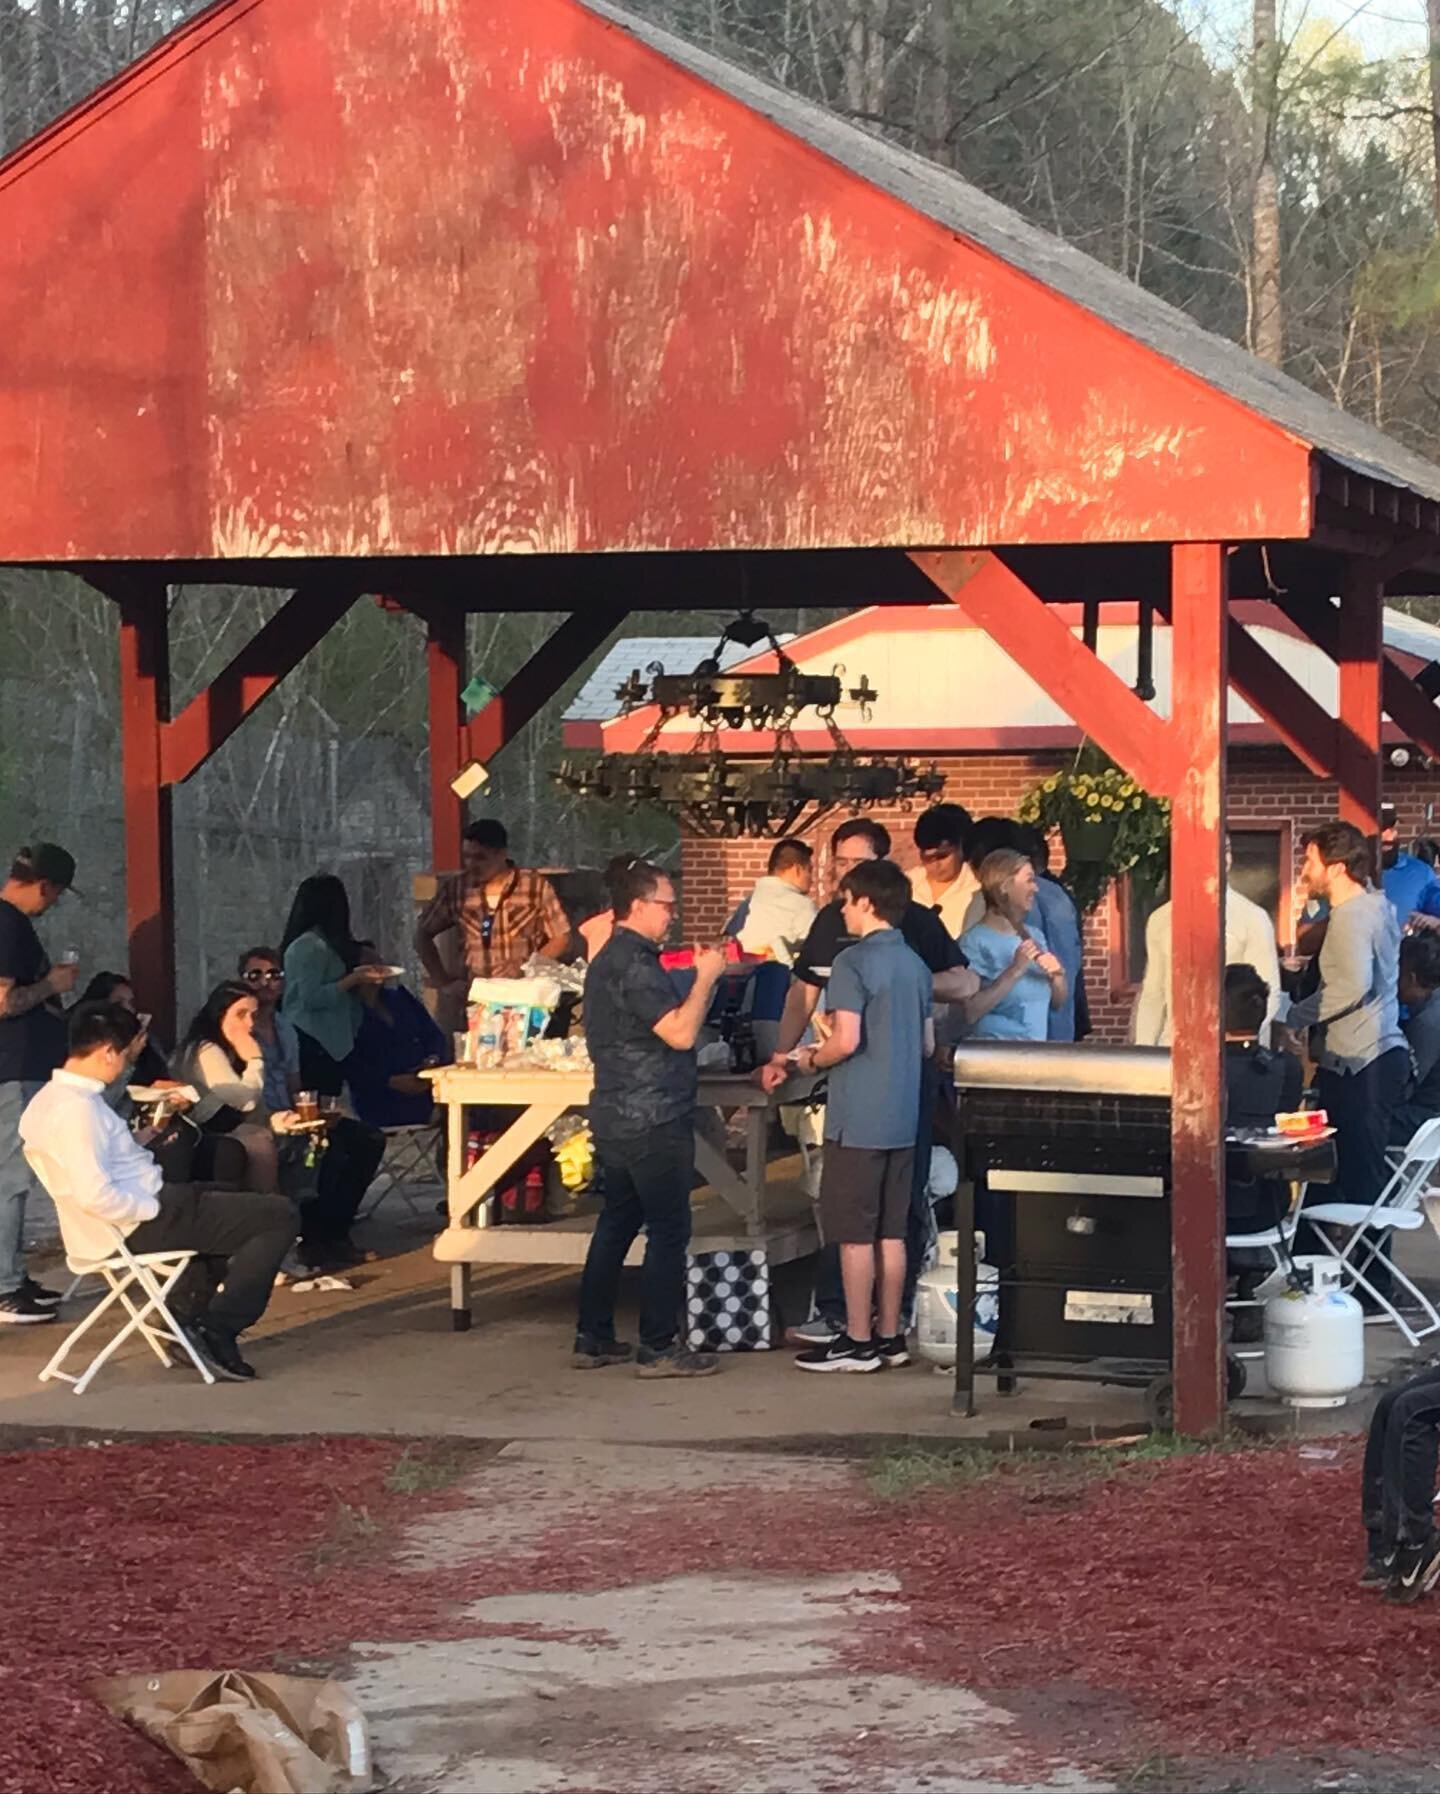 Great turnout at Freedom Hill Resort Grand Viewing Party.  #camping #campsites #campground #tinyhousemovement #tinyhouseonwheels #rv #rvlifestyle #rvtravel #grandopening #uniquehotels #airbnbexperience #airbnb #vrbo #airbnbuniquestays